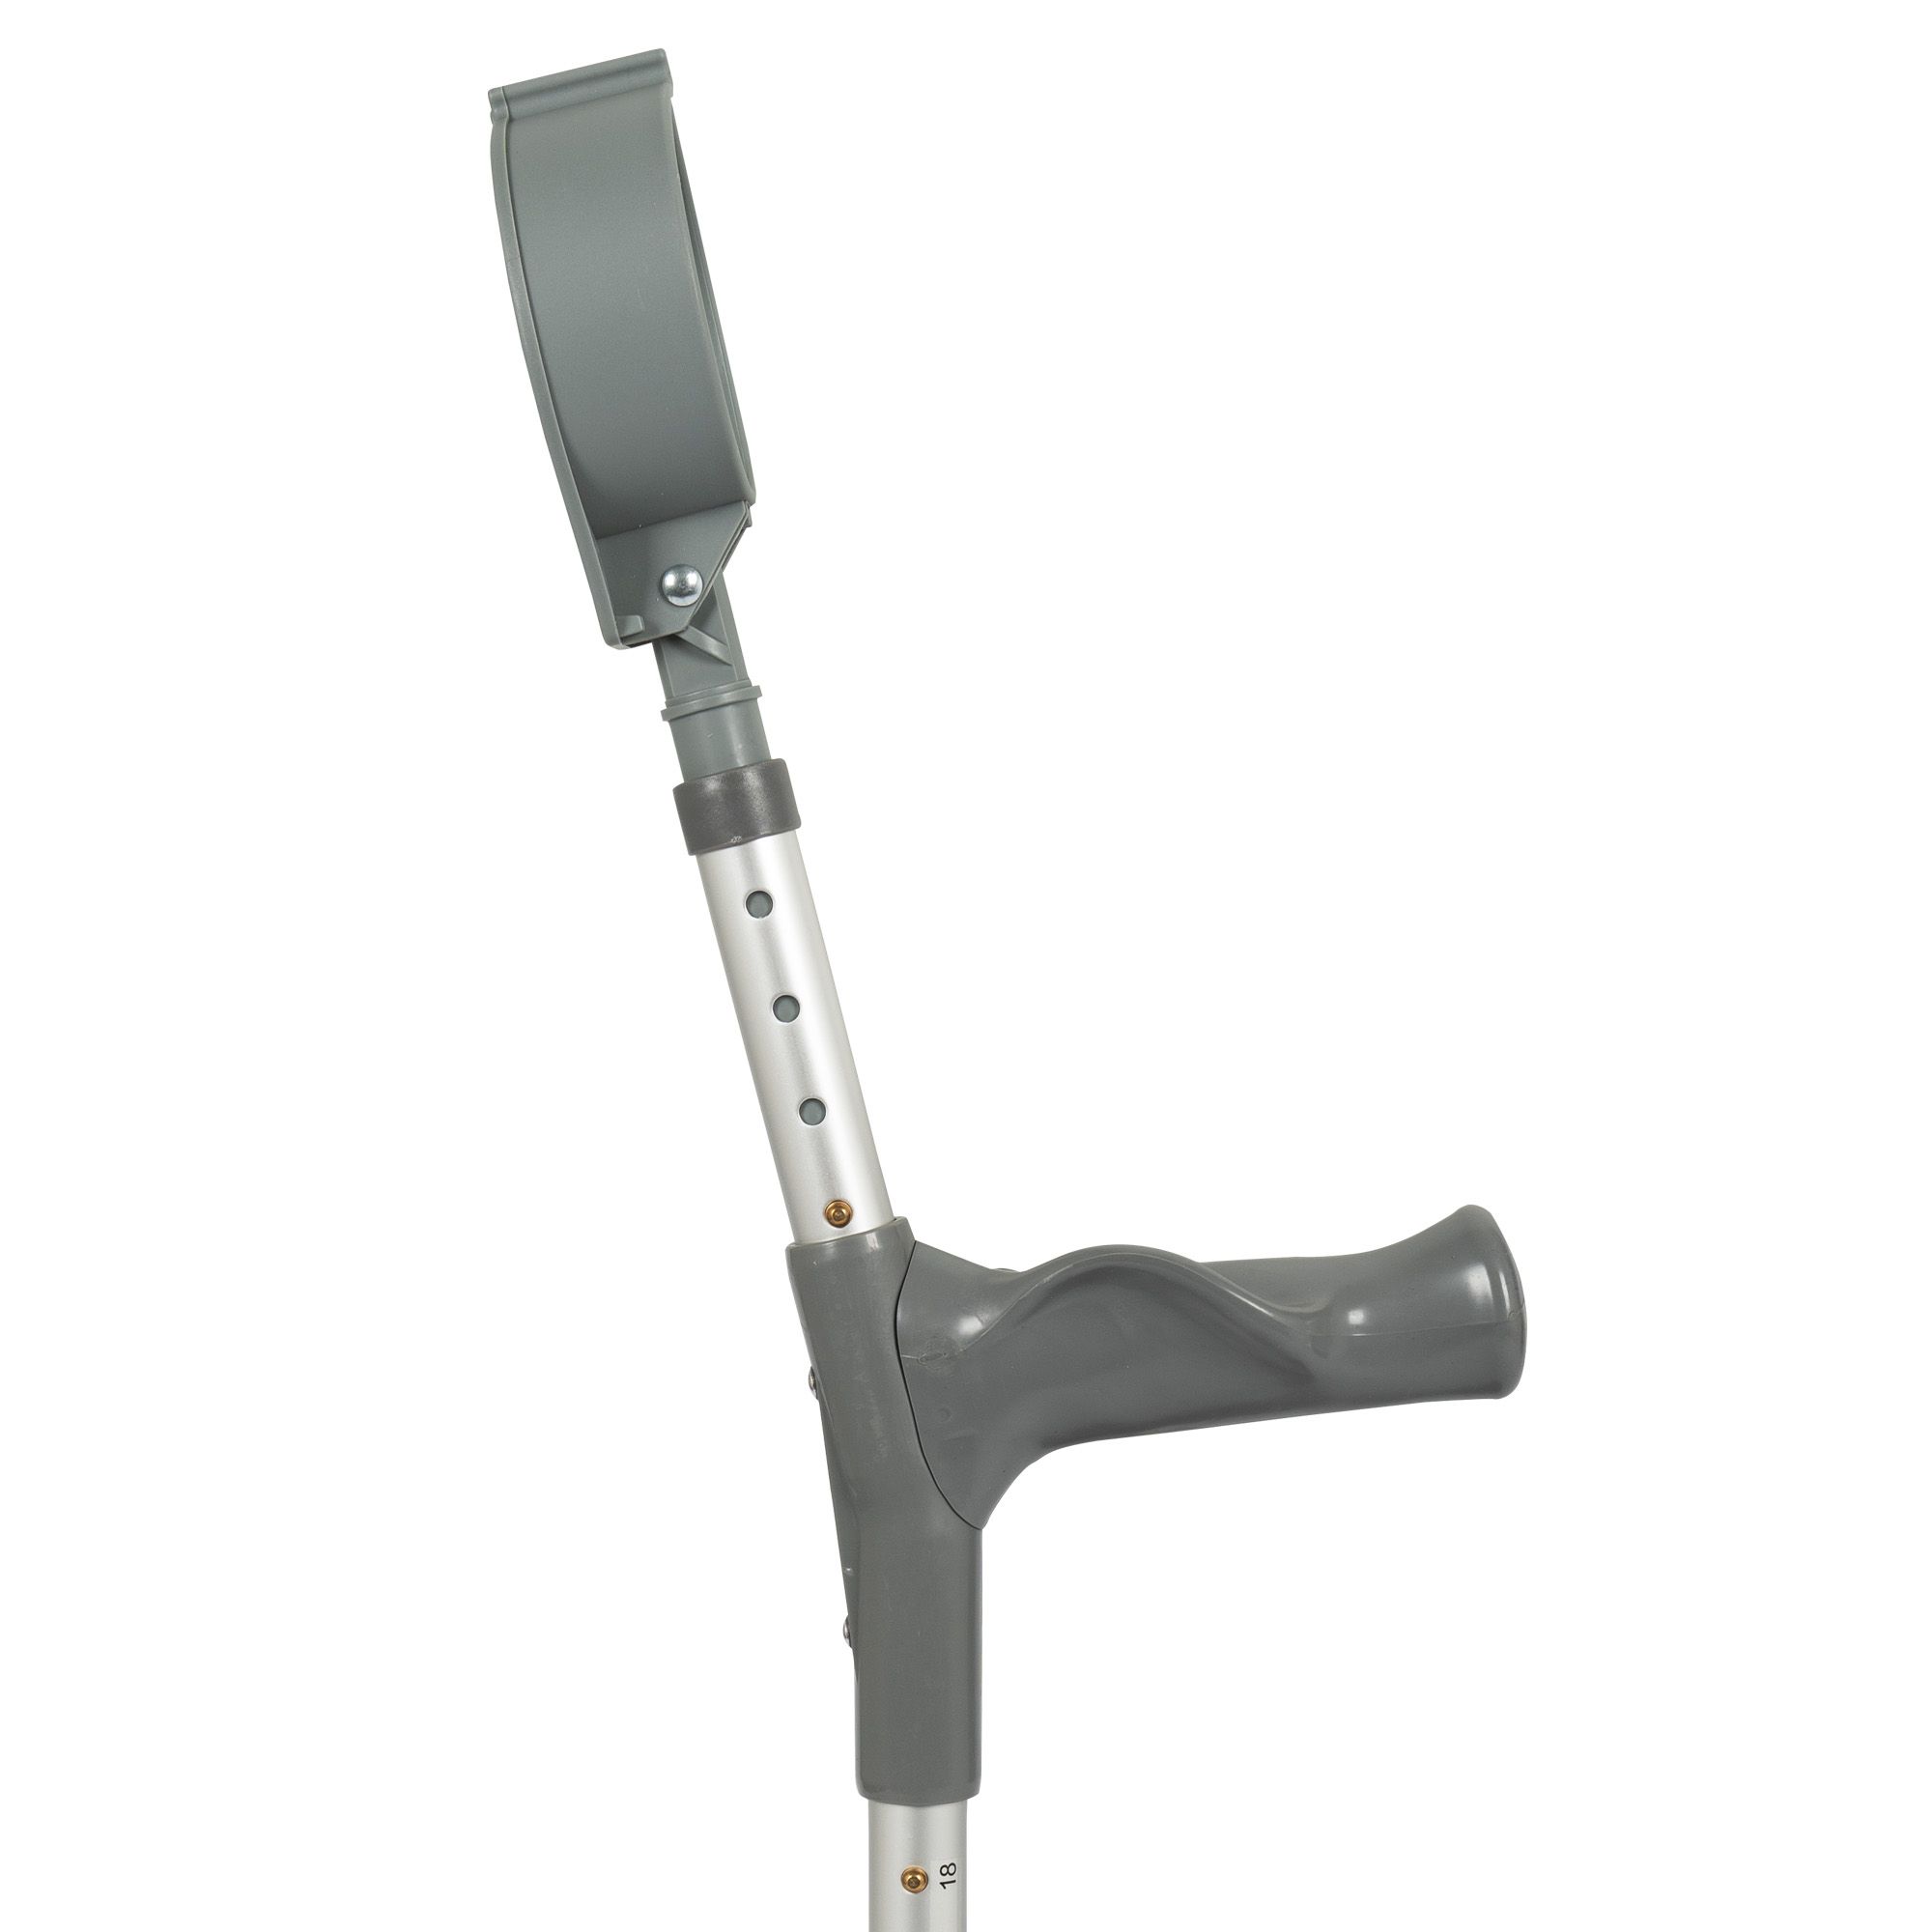 Dunimed elbow crutches zoomed in side